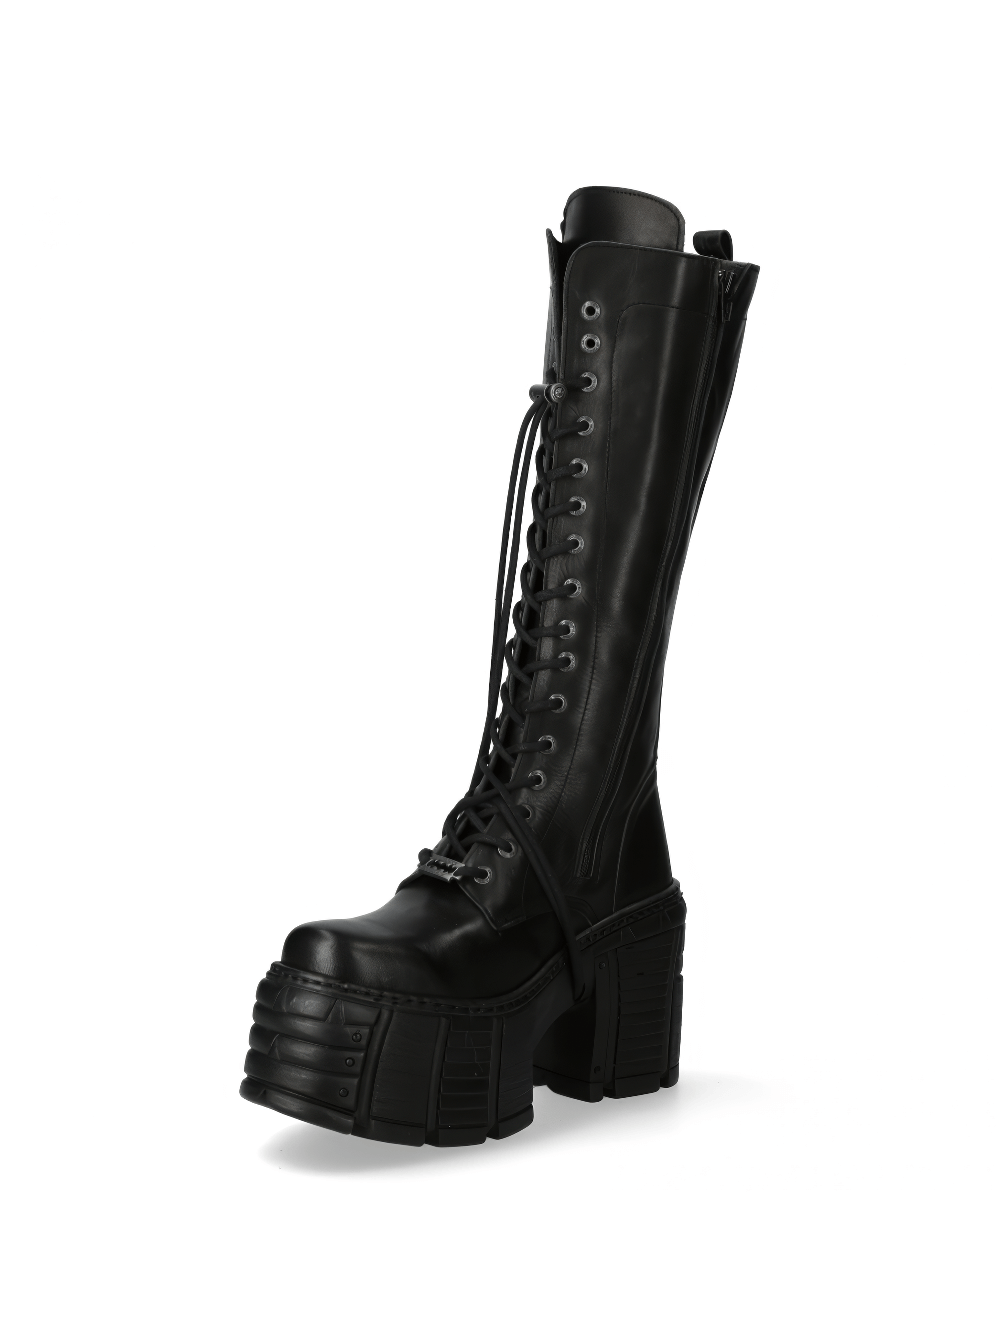 NEW ROCK Punk Lace-Up Black Leather Knee High Boots